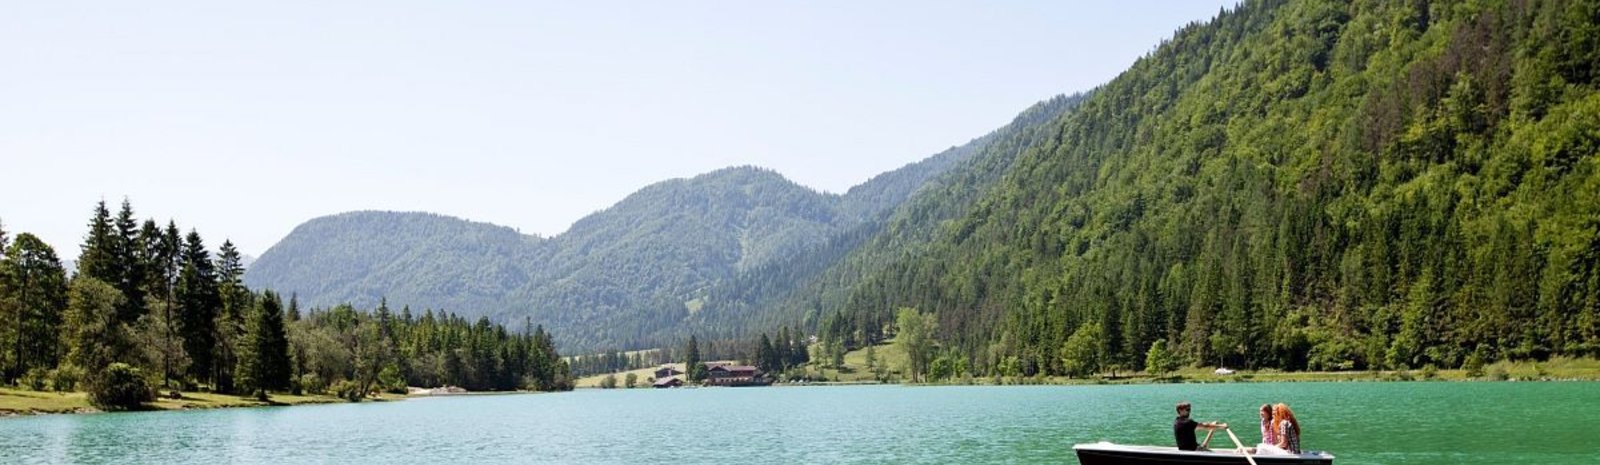 boating on the Pillersee | © TVB PillerseeTal